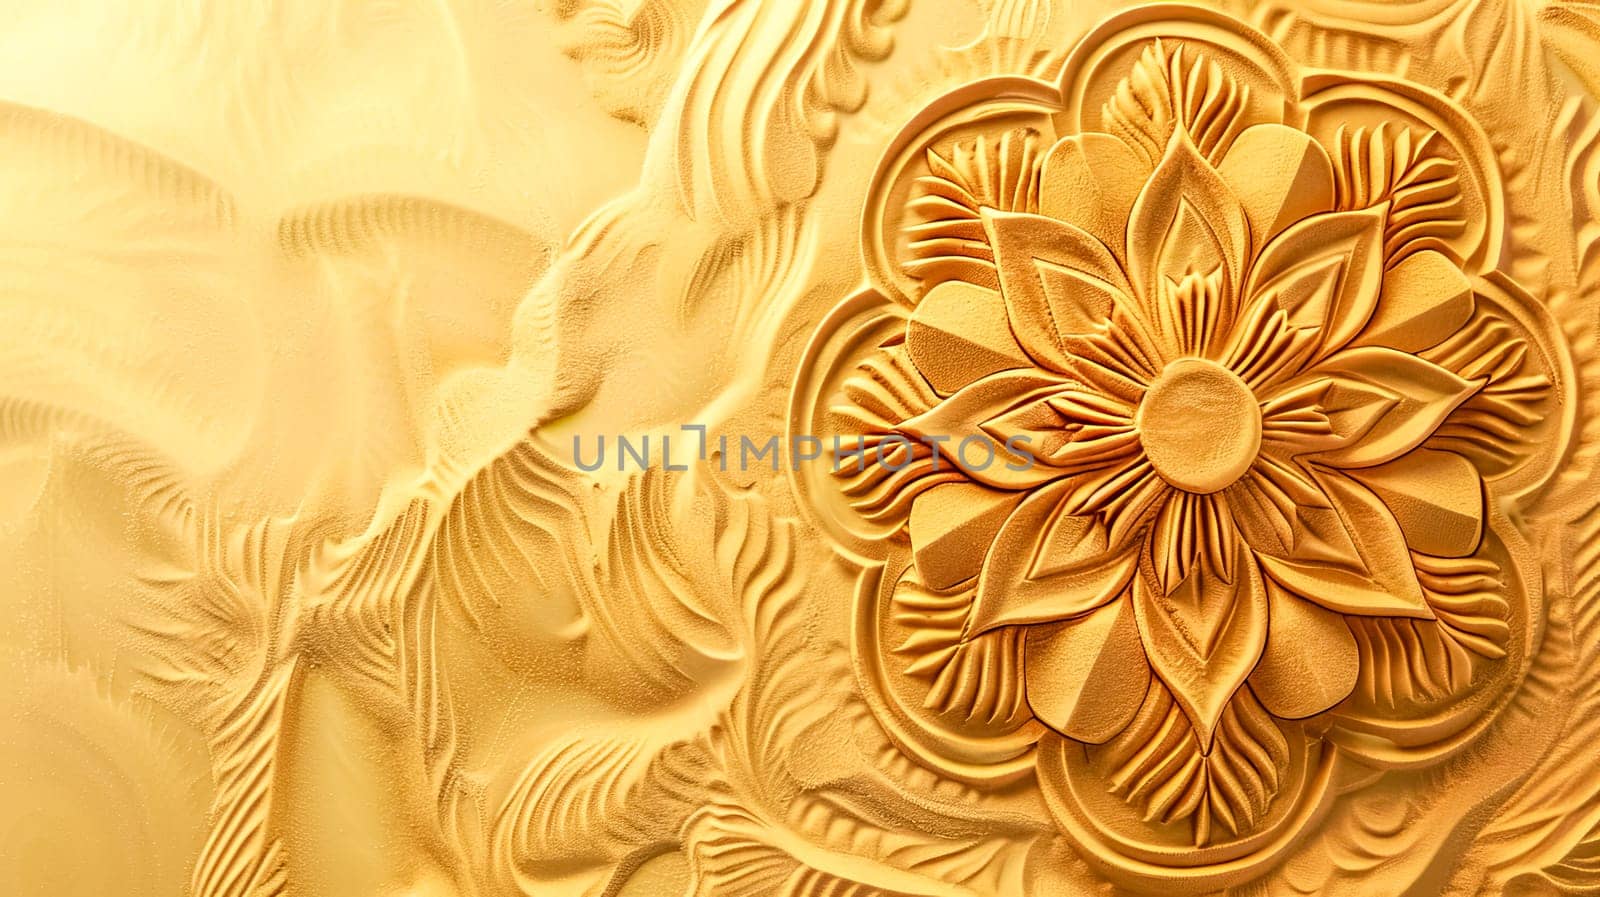 Elegant carved floral pattern in golden relief with intricate details by Edophoto